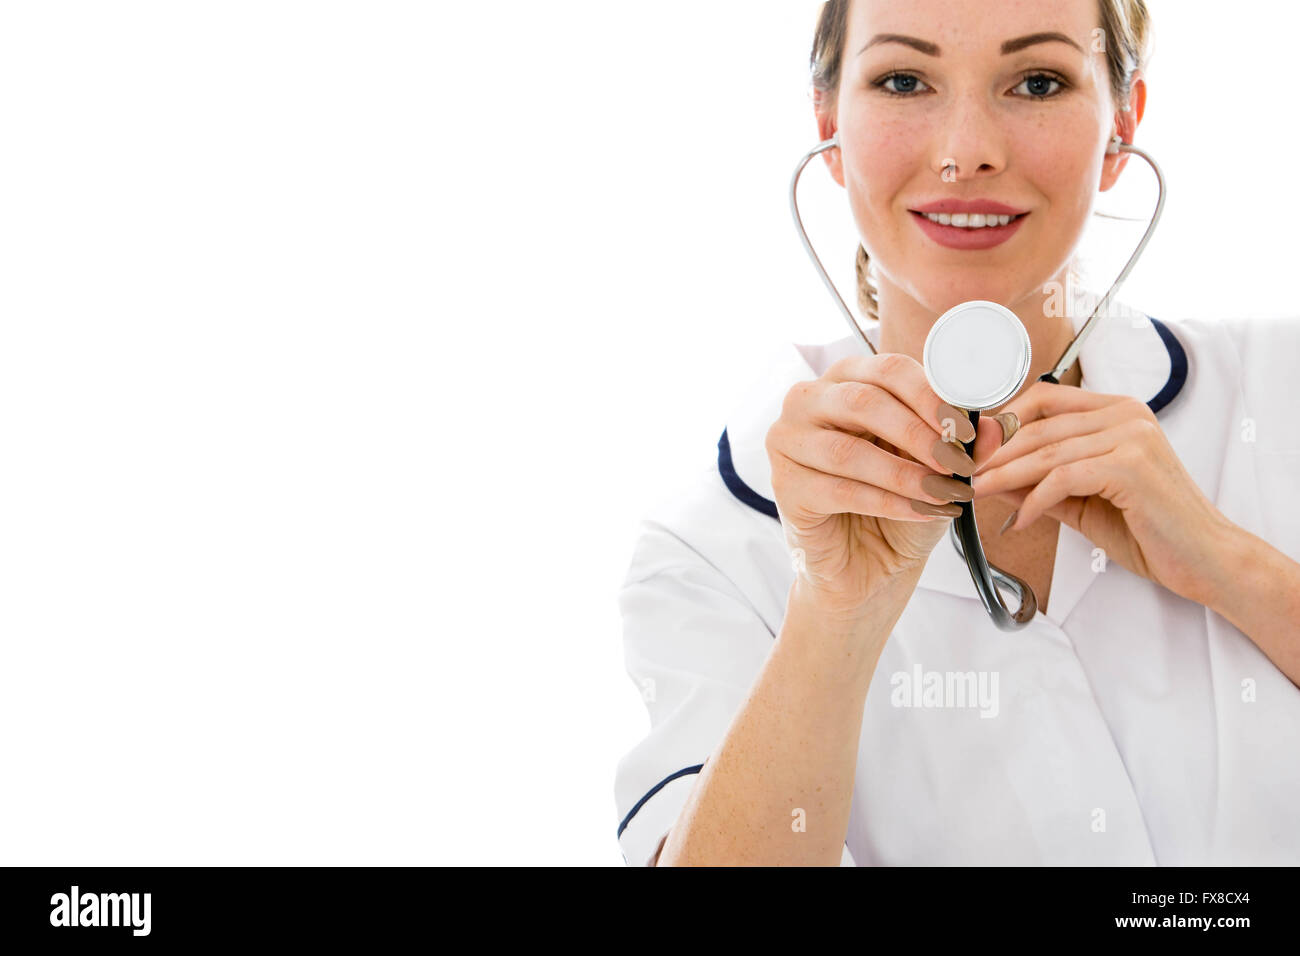 Happy Smiling Female Doctor With A Stethoscope Isolated Against A White Background Stock Photo